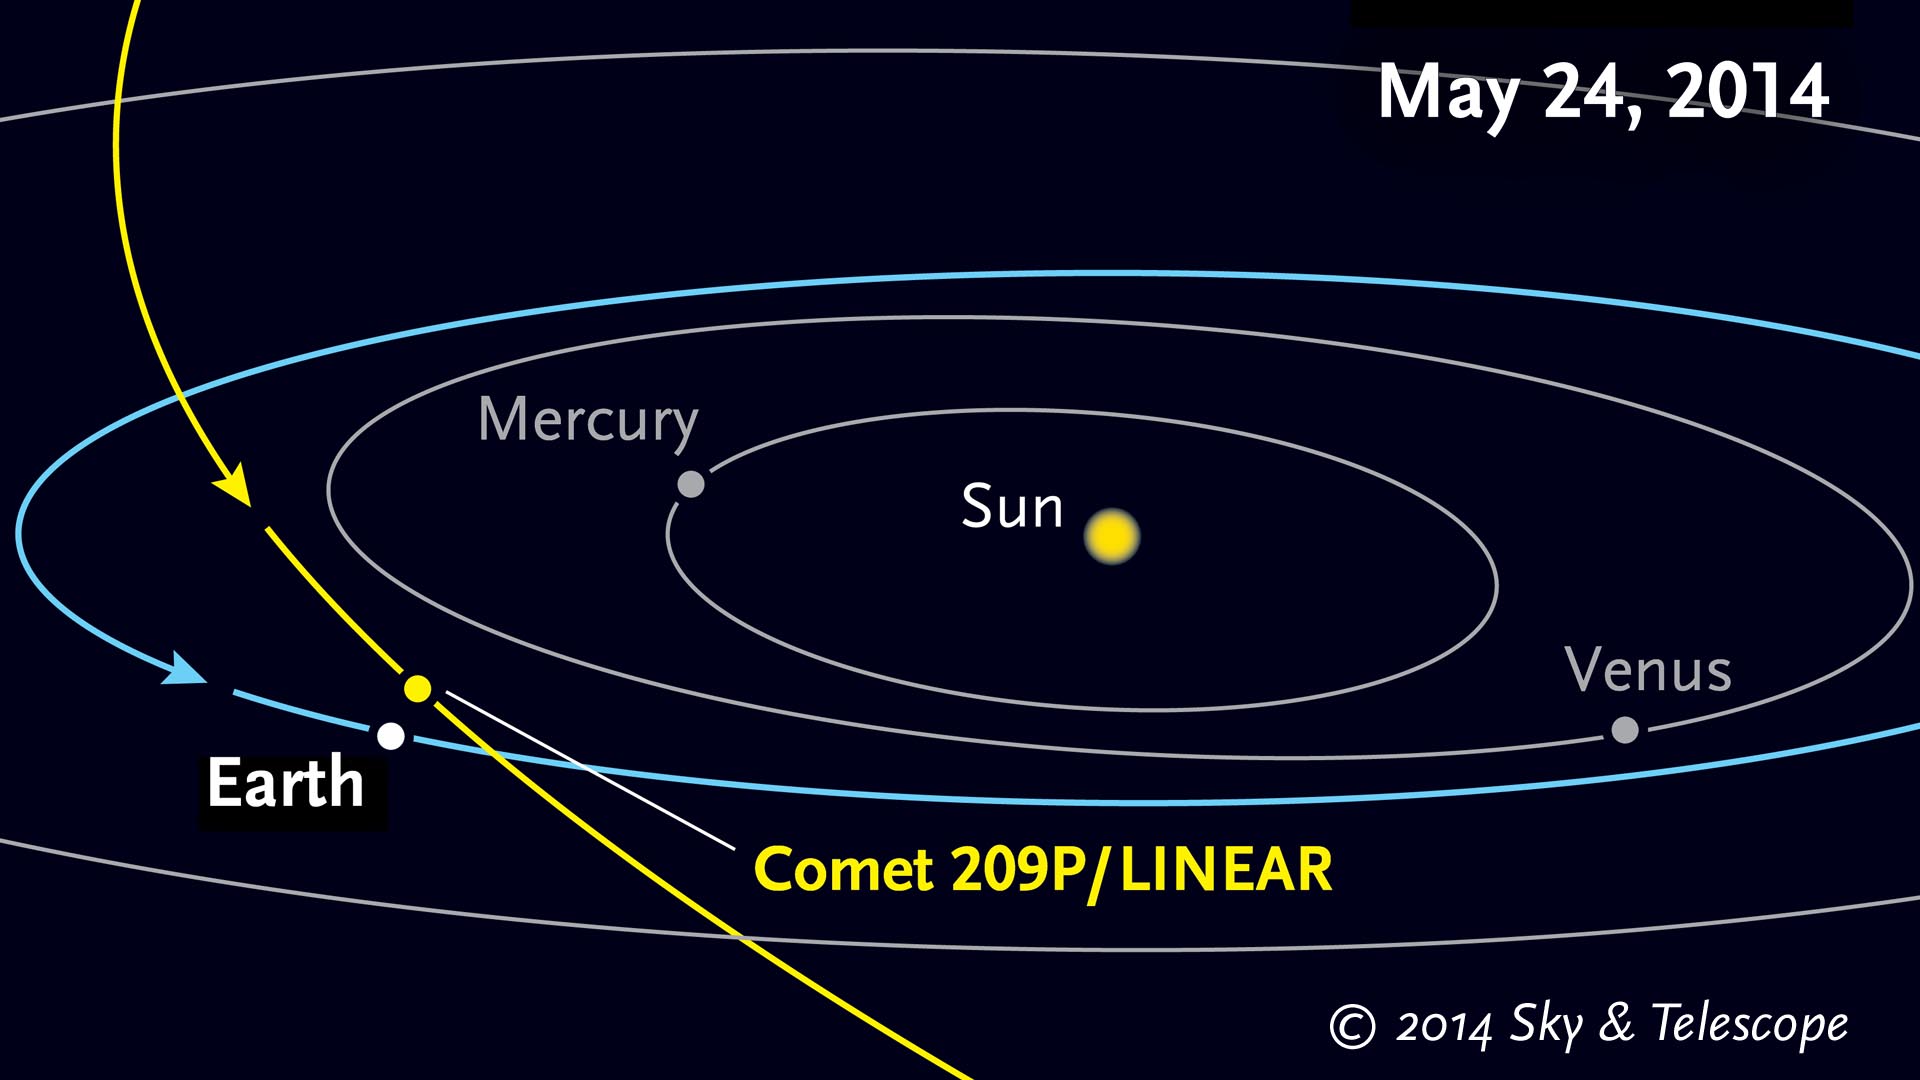 Close visit from Comet 209P/LINEAR